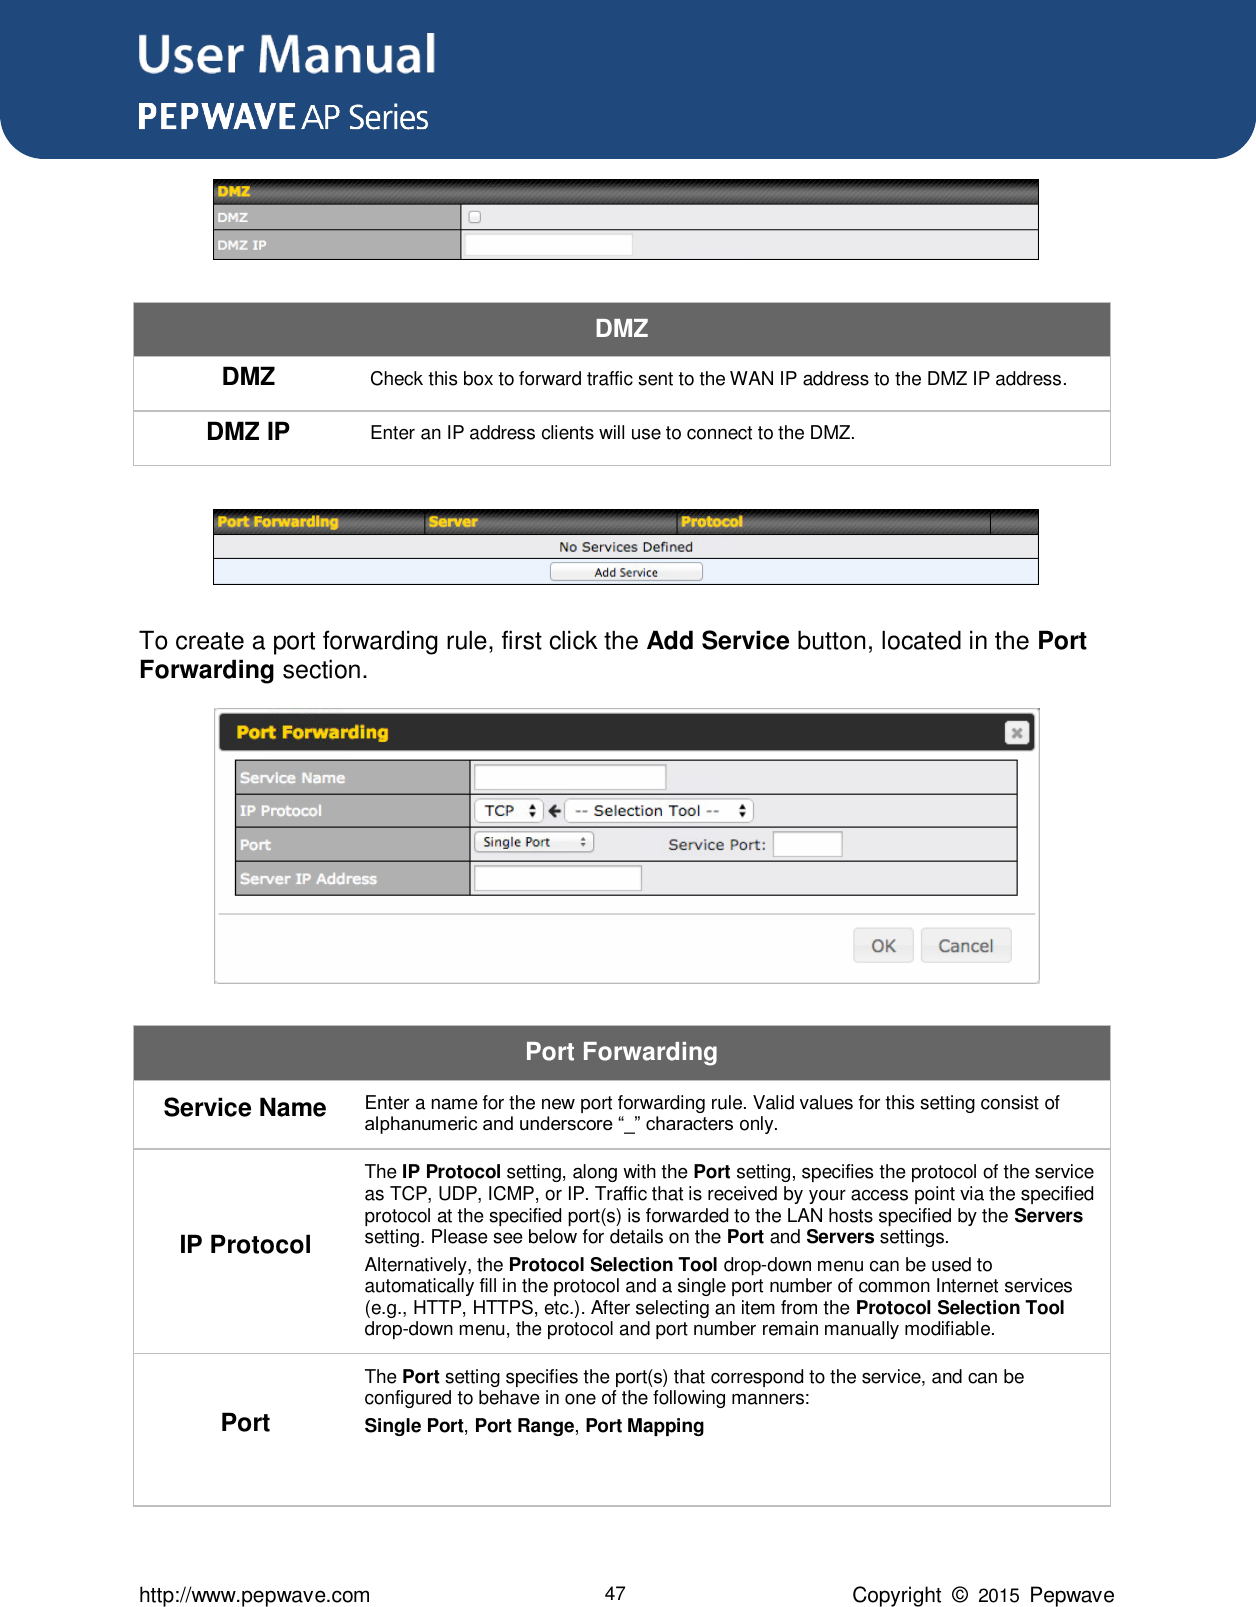 User Manual      http://www.pepwave.com 47 Copyright  ©  2015  Pepwave  DMZ DMZ Check this box to forward traffic sent to the WAN IP address to the DMZ IP address. DMZ IP Enter an IP address clients will use to connect to the DMZ.   To create a port forwarding rule, first click the Add Service button, located in the Port Forwarding section.  Port Forwarding Service Name Enter a name for the new port forwarding rule. Valid values for this setting consist of alphanumeric and underscore “_” characters only. IP Protocol The IP Protocol setting, along with the Port setting, specifies the protocol of the service as TCP, UDP, ICMP, or IP. Traffic that is received by your access point via the specified protocol at the specified port(s) is forwarded to the LAN hosts specified by the Servers setting. Please see below for details on the Port and Servers settings. Alternatively, the Protocol Selection Tool drop-down menu can be used to automatically fill in the protocol and a single port number of common Internet services (e.g., HTTP, HTTPS, etc.). After selecting an item from the Protocol Selection Tool drop-down menu, the protocol and port number remain manually modifiable. Port The Port setting specifies the port(s) that correspond to the service, and can be configured to behave in one of the following manners: Single Port, Port Range, Port Mapping   